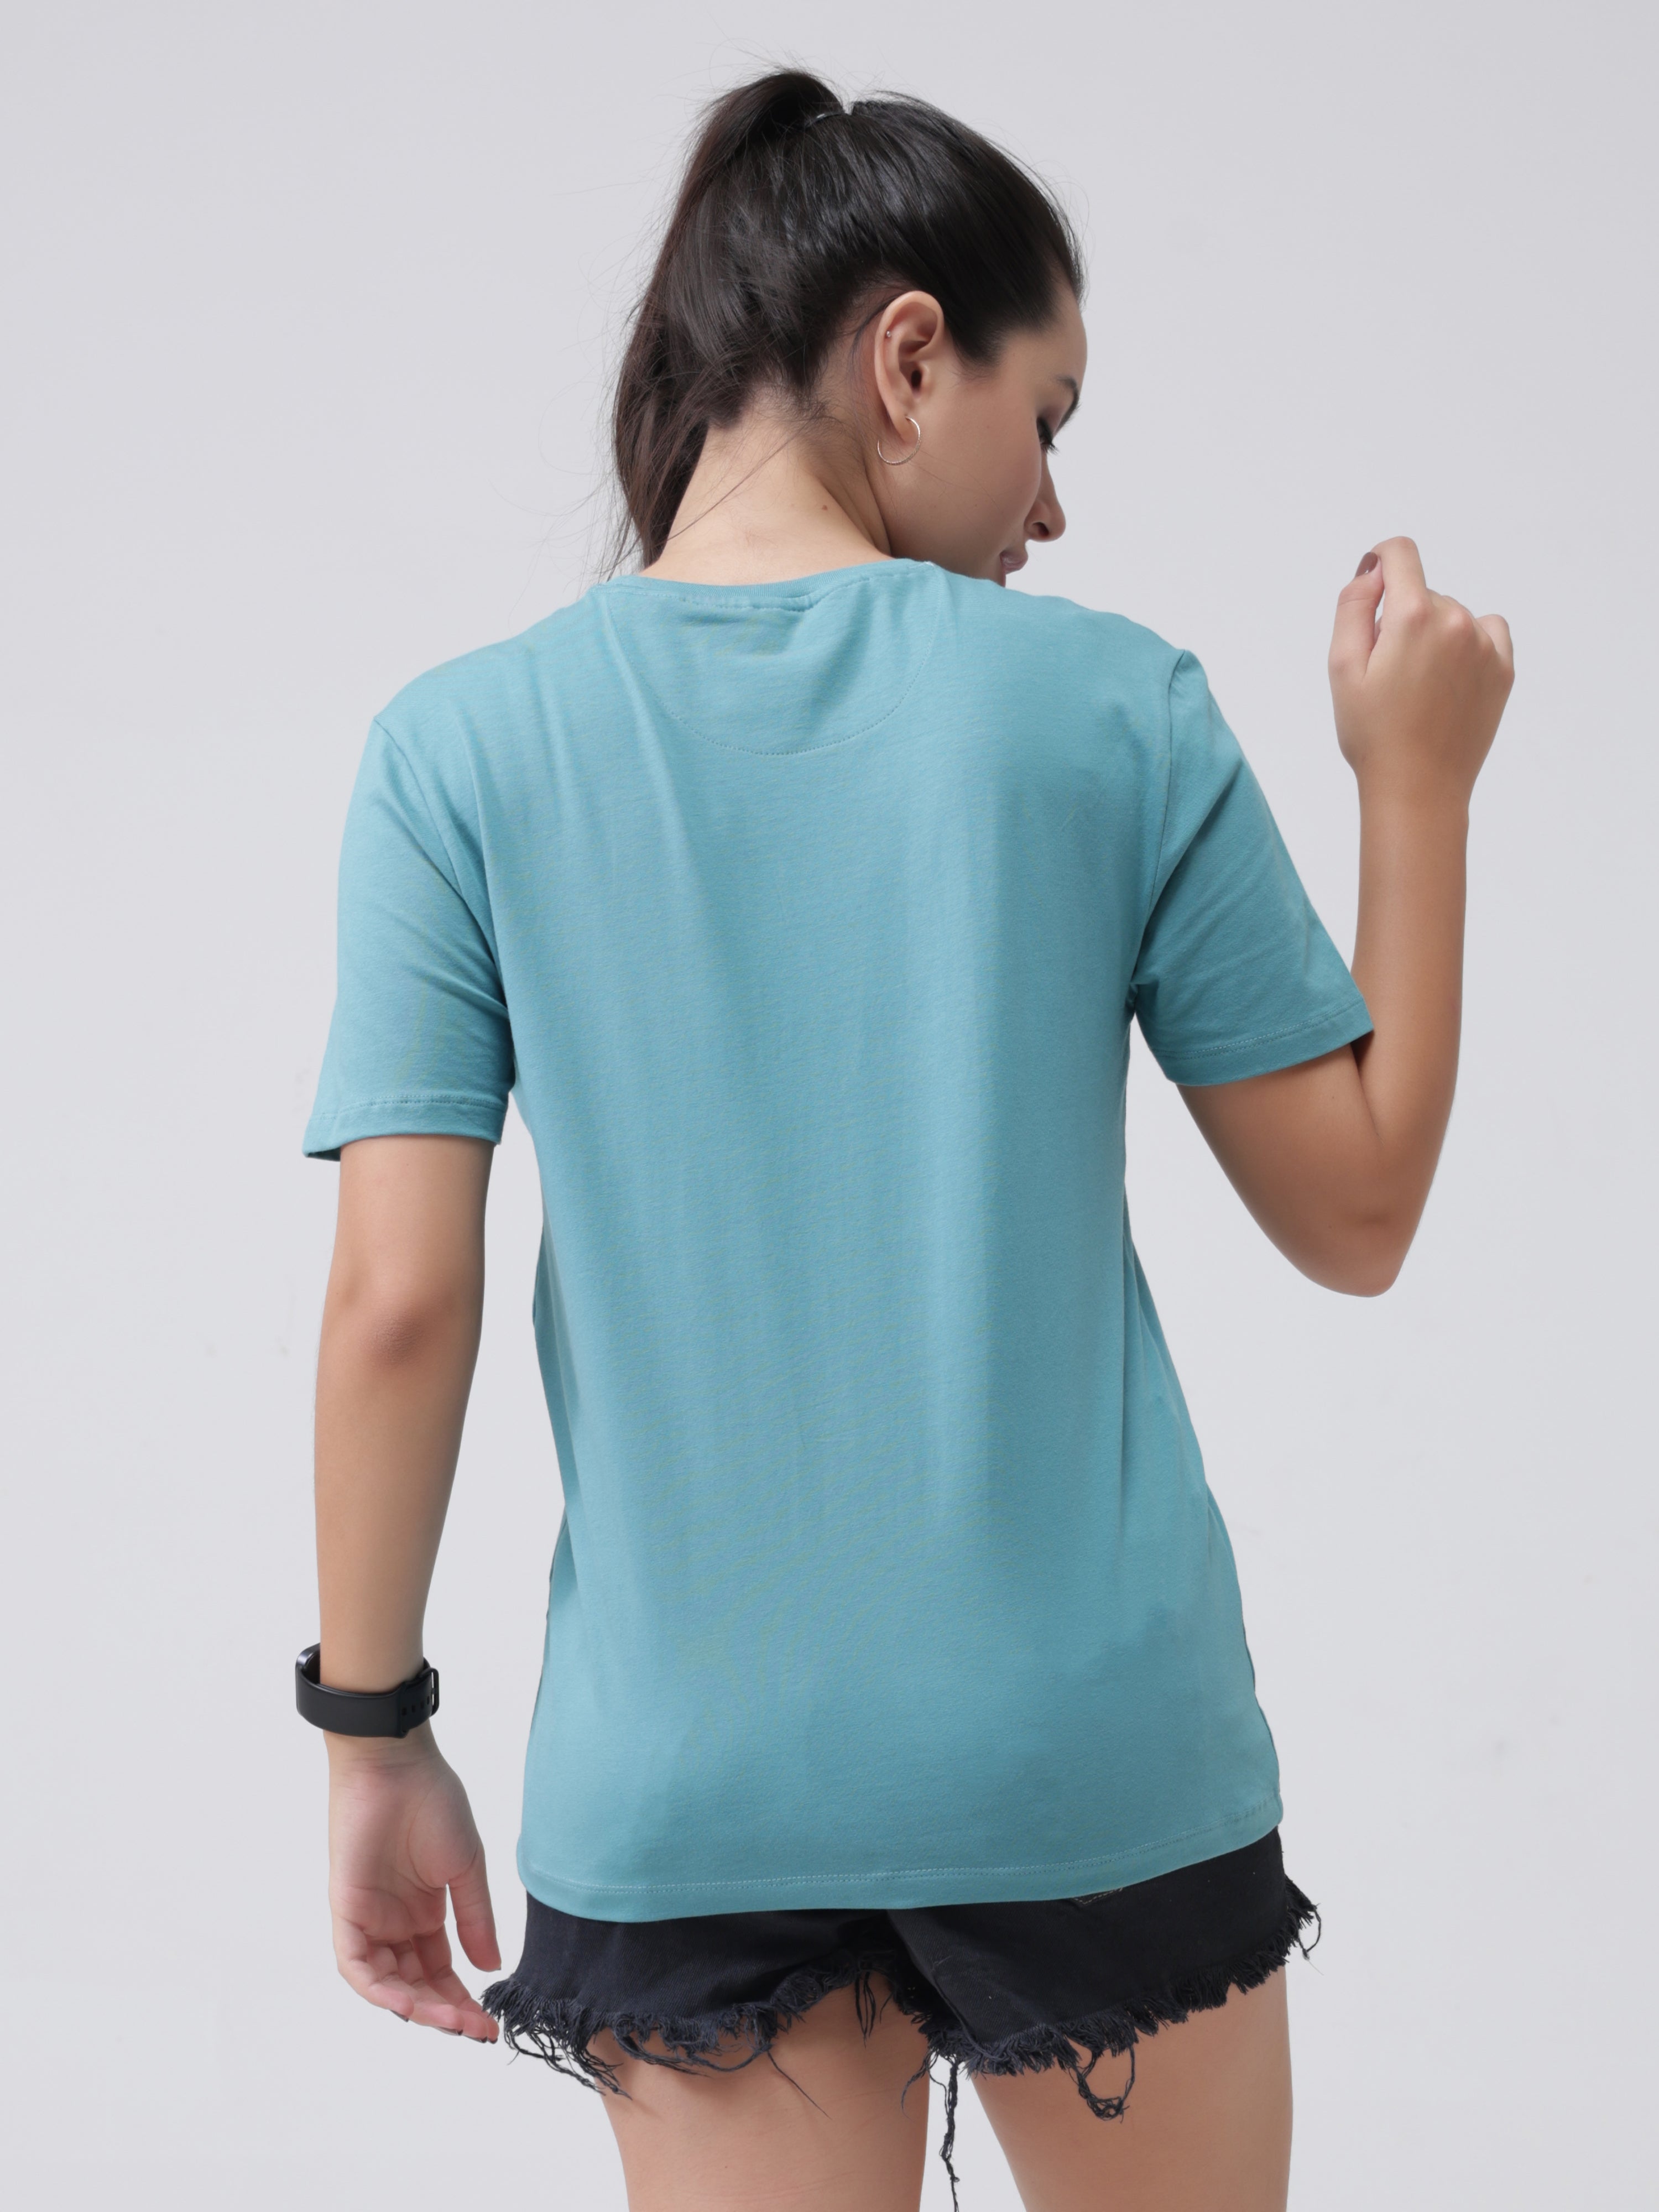 Woman wearing a blue round-neck Turms T-shirt and black shorts, showcasing the back view.